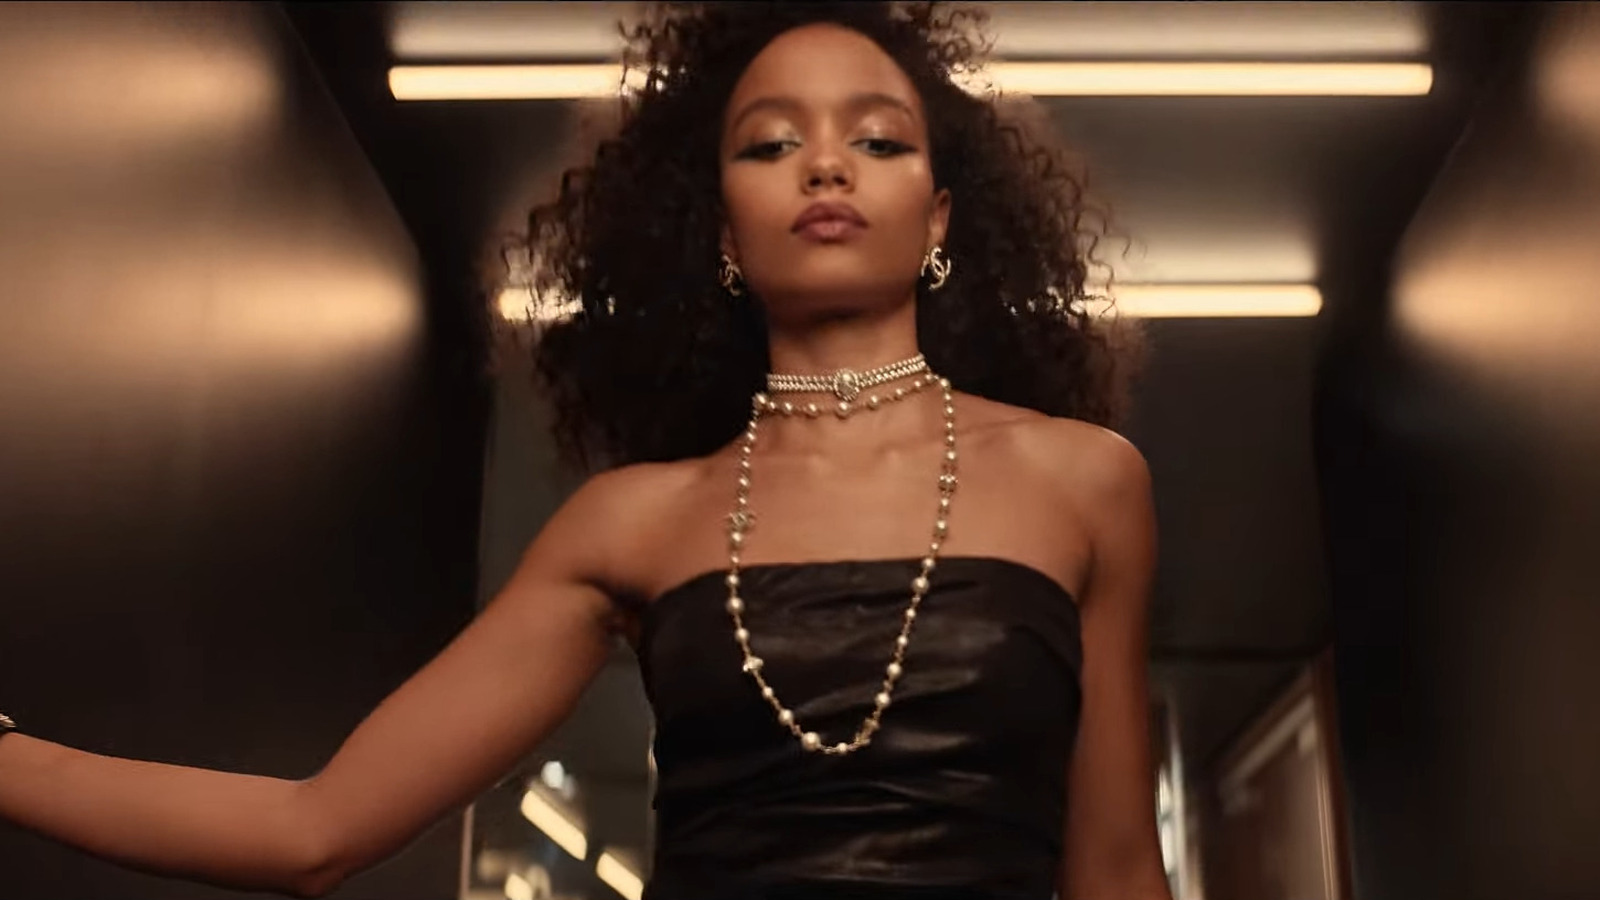 What Is The Song In Chanel's Coco Mademoiselle Commercial With Whitney Peak?